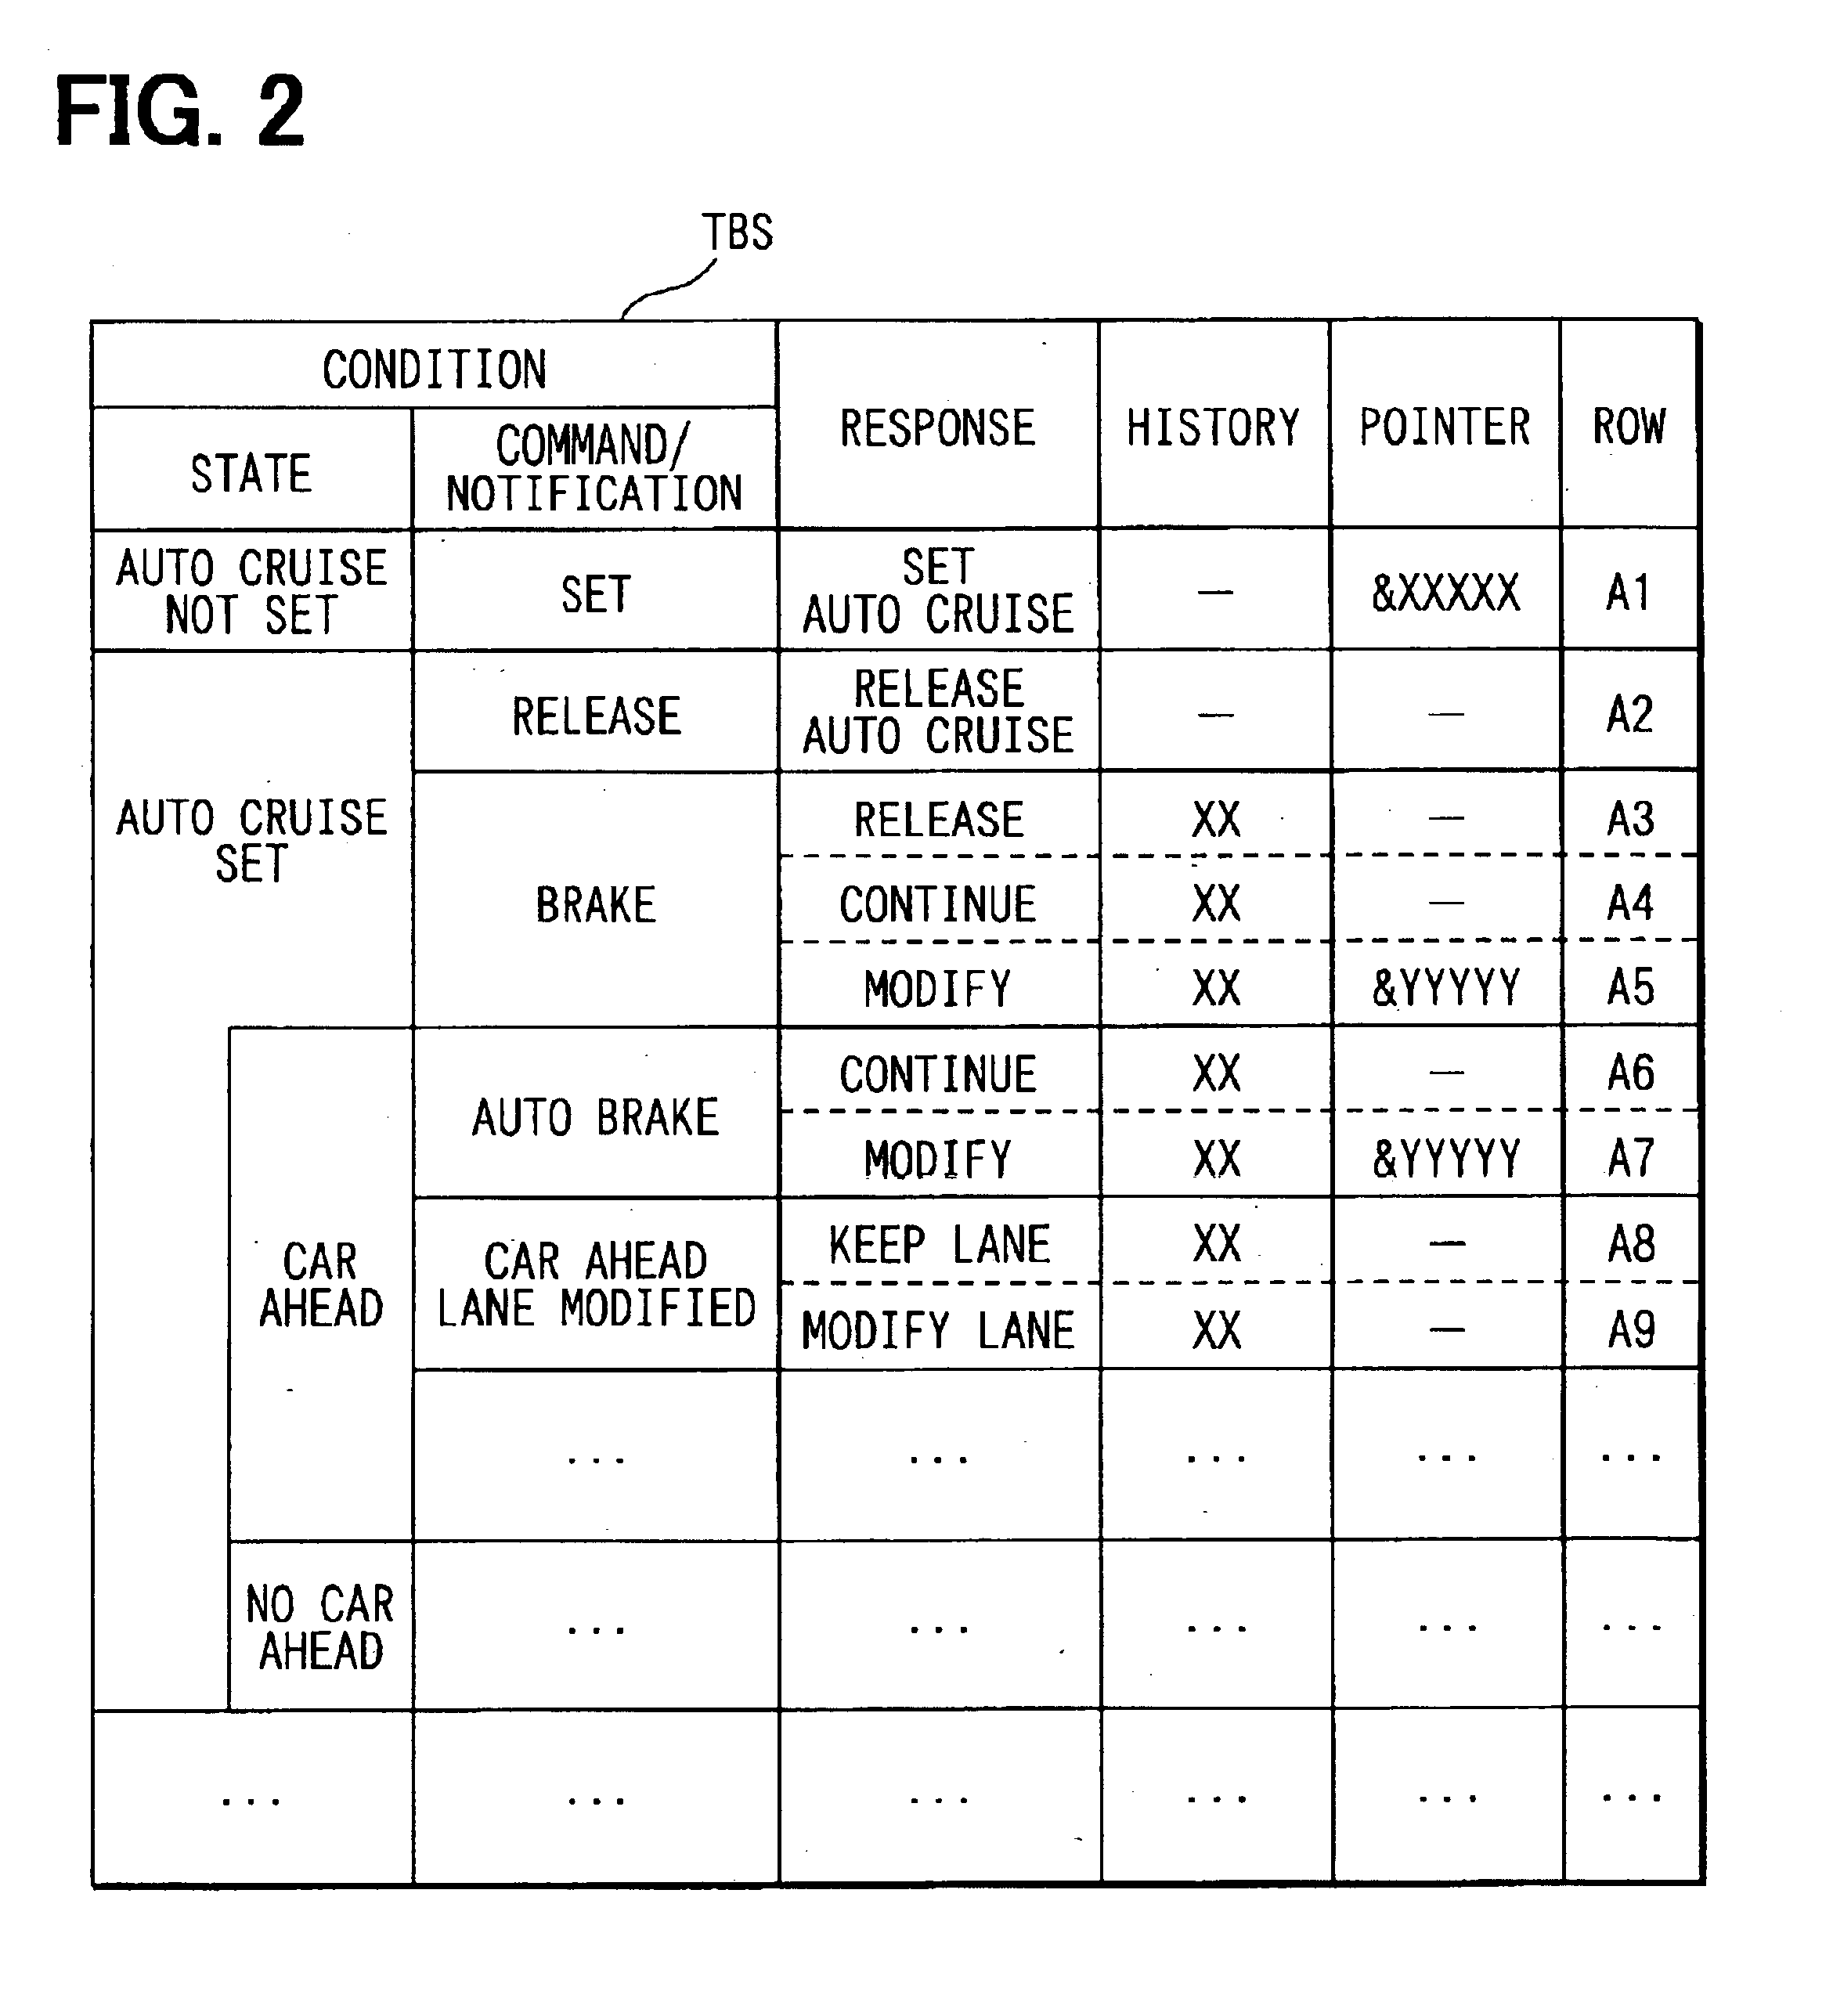 Vehicle agent system acting for driver in controlling in-vehicle devices